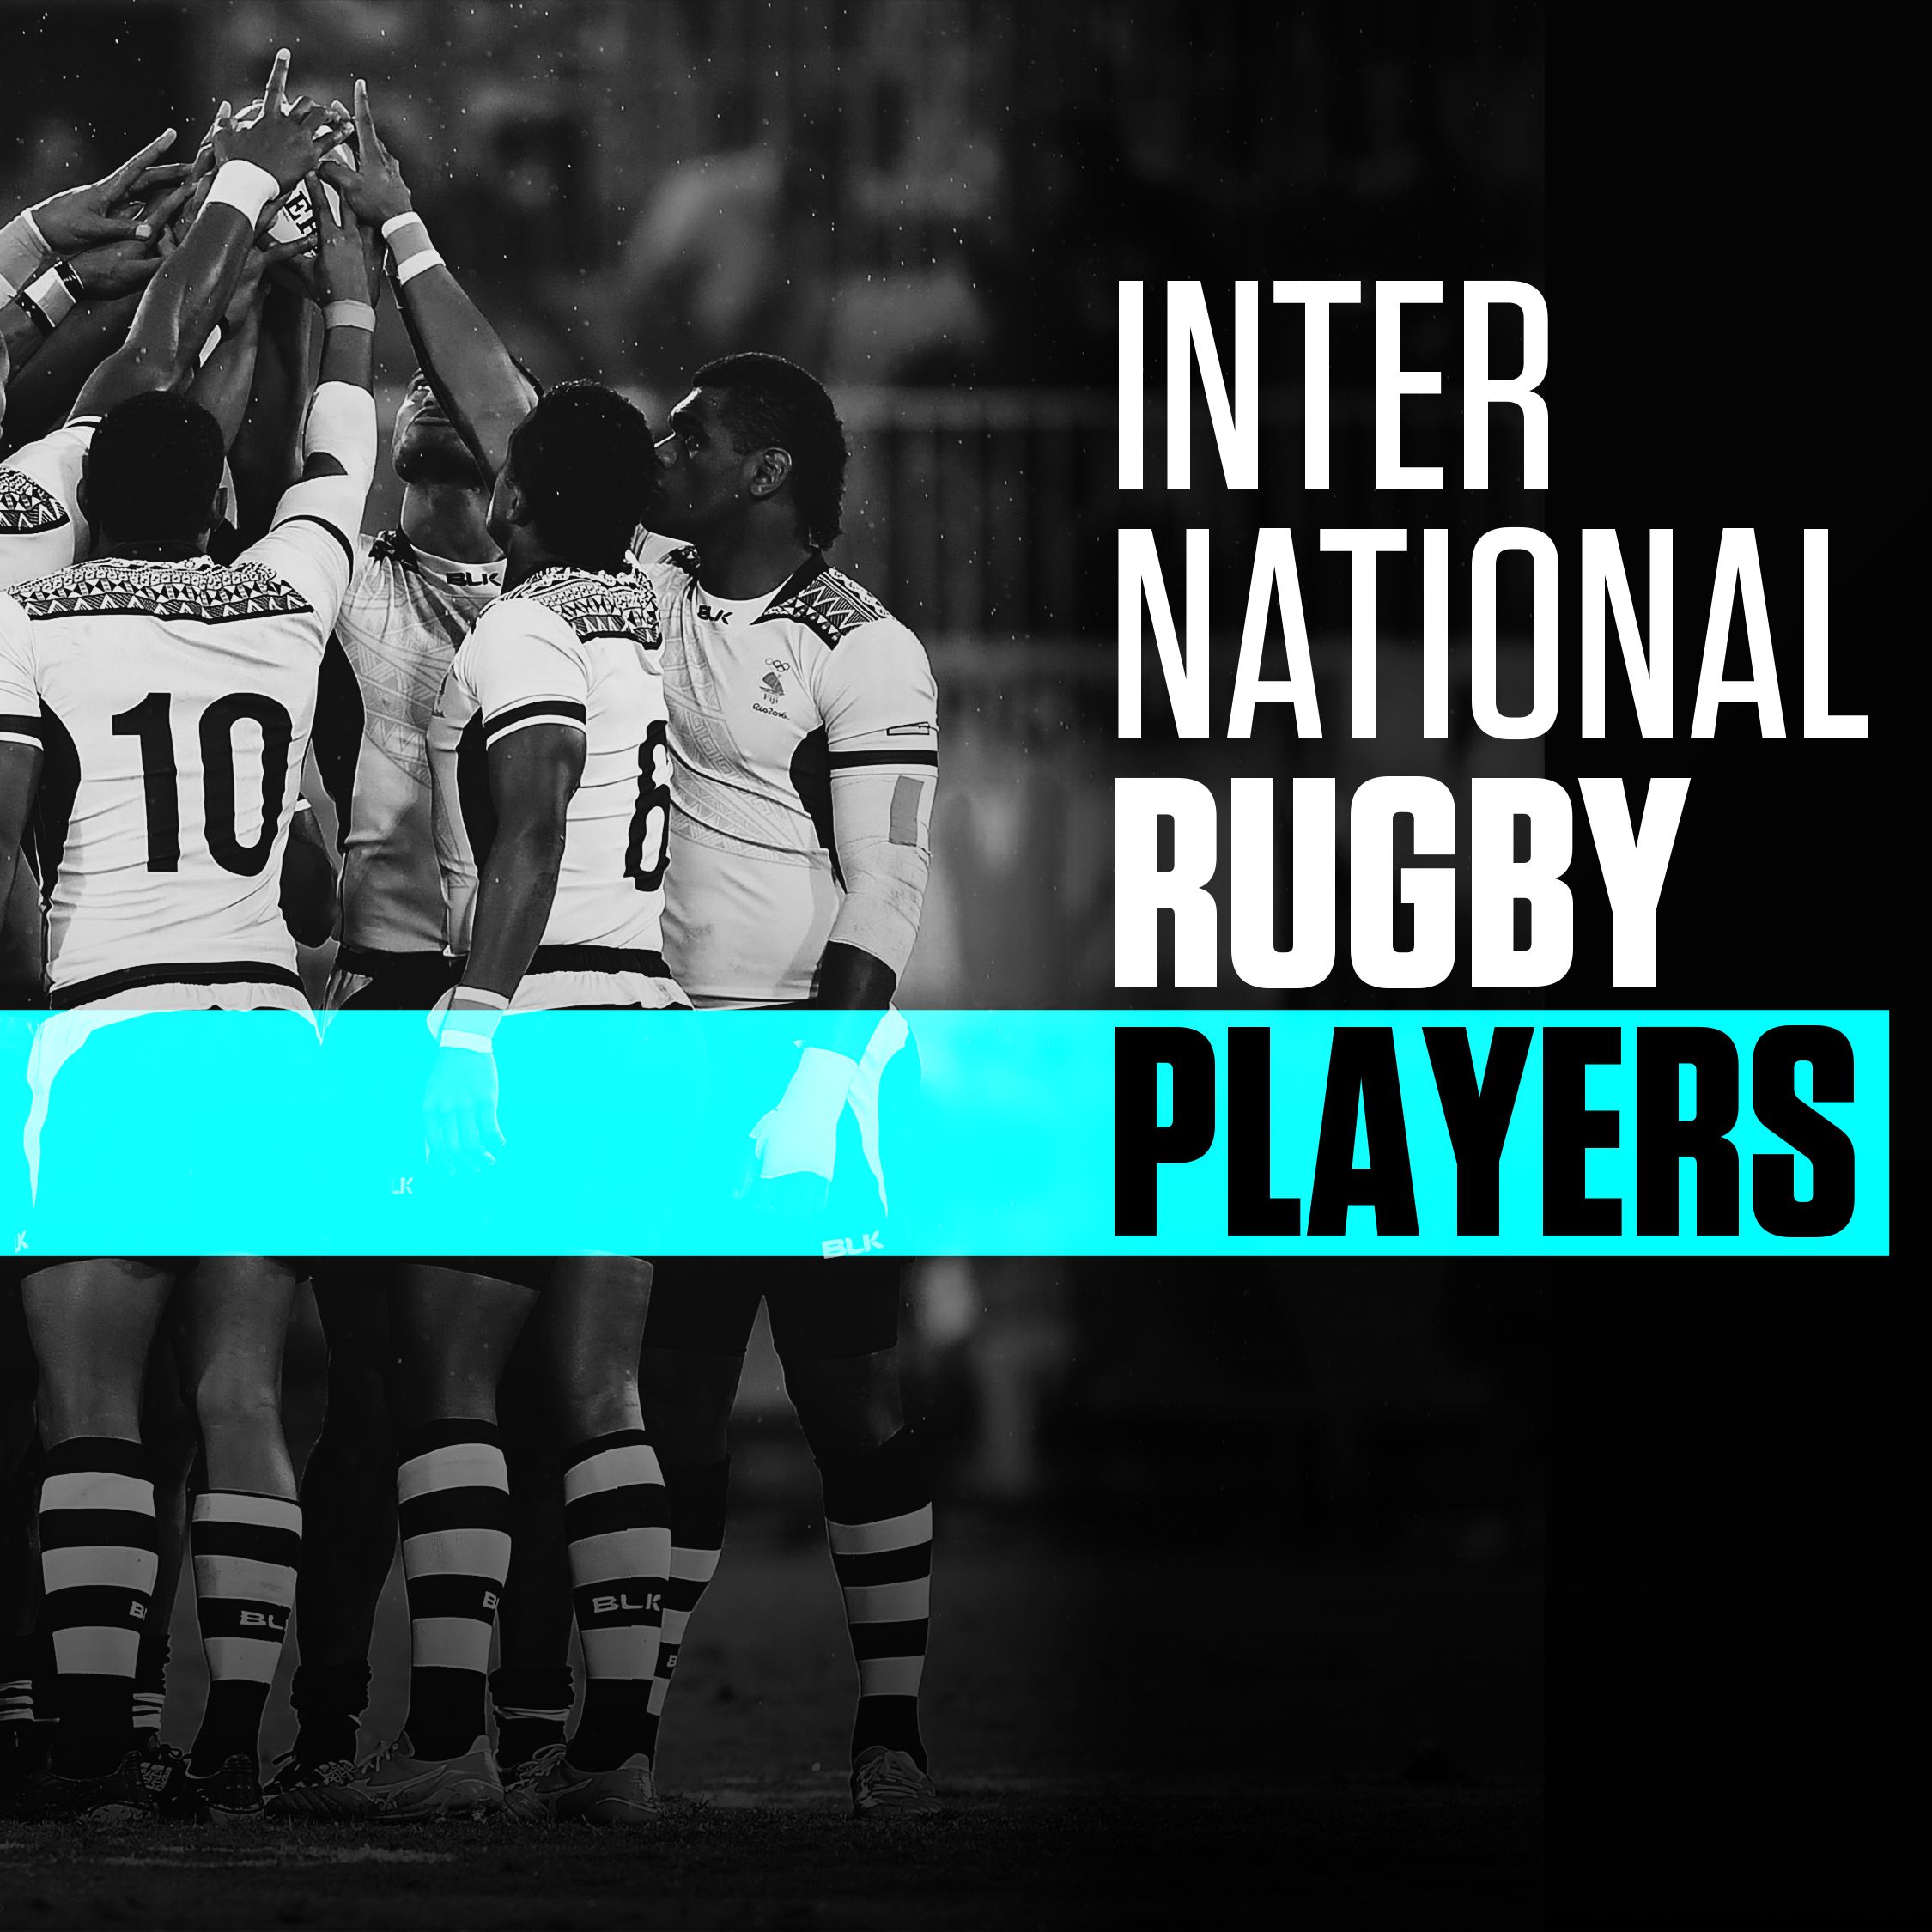 Stream International Rugby Players Listen to podcast episodes online for free on SoundCloud